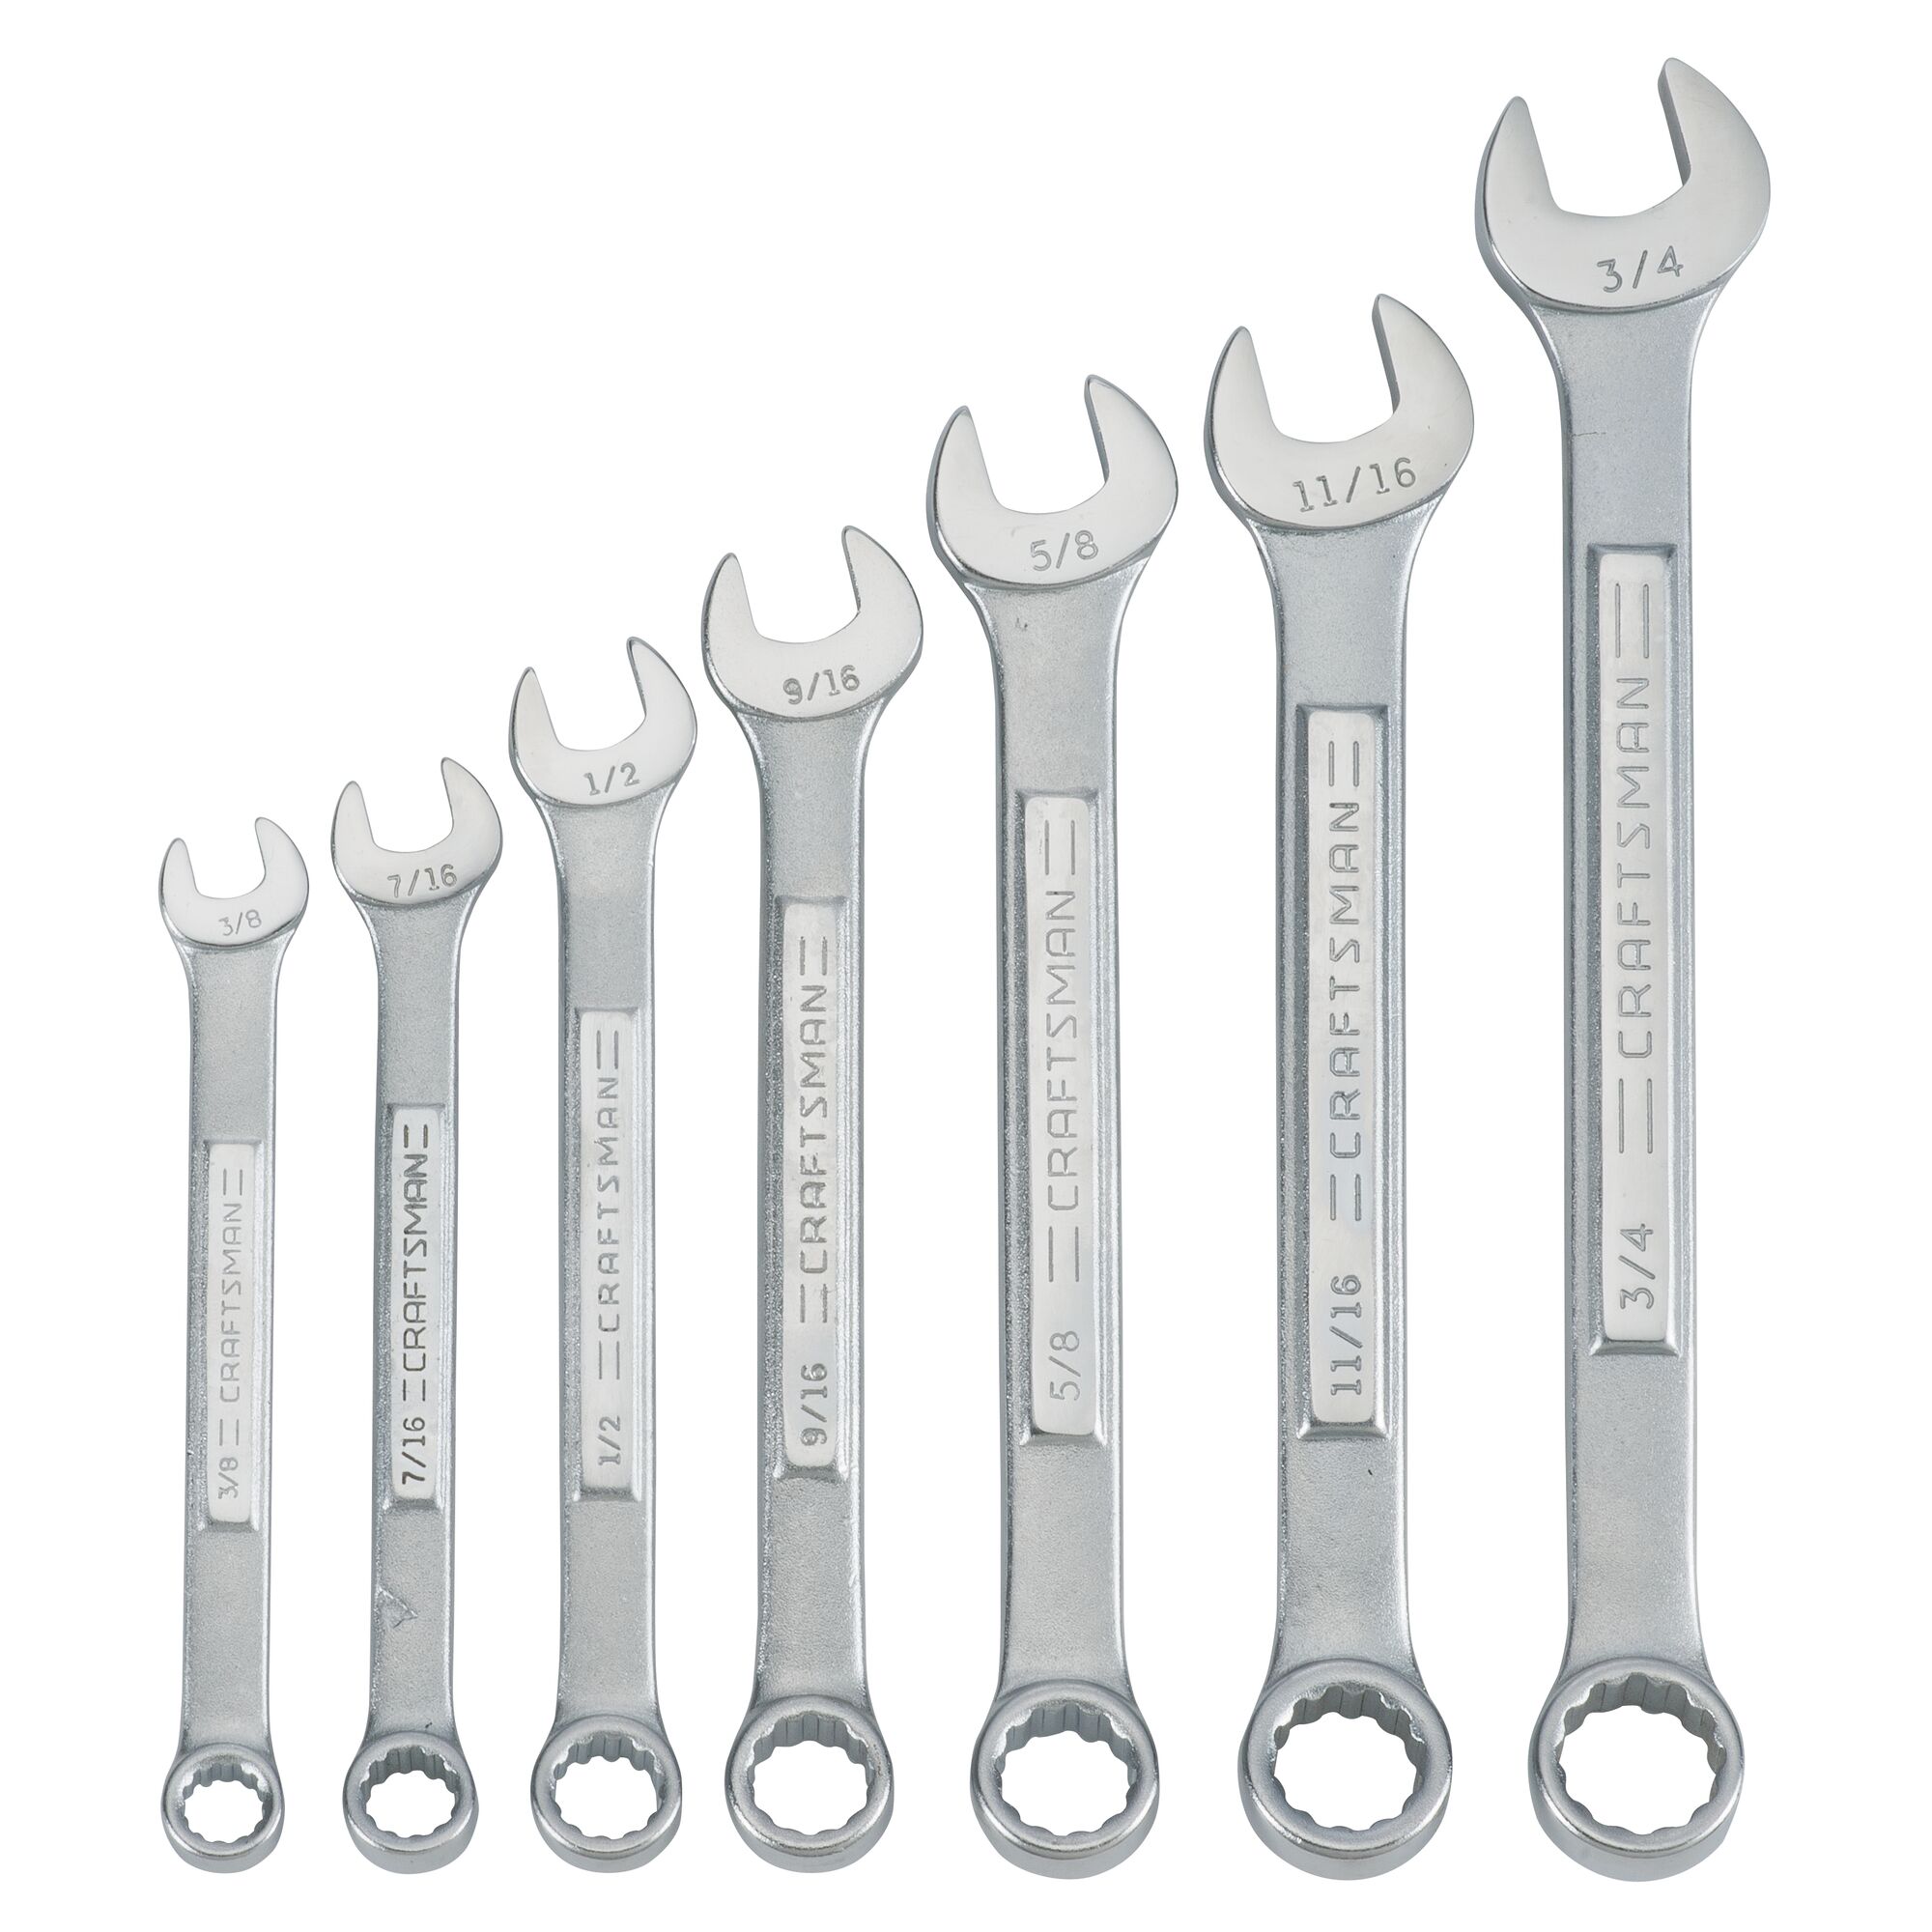 1-5/16-in Combination Wrenches & Sets at Lowes.com